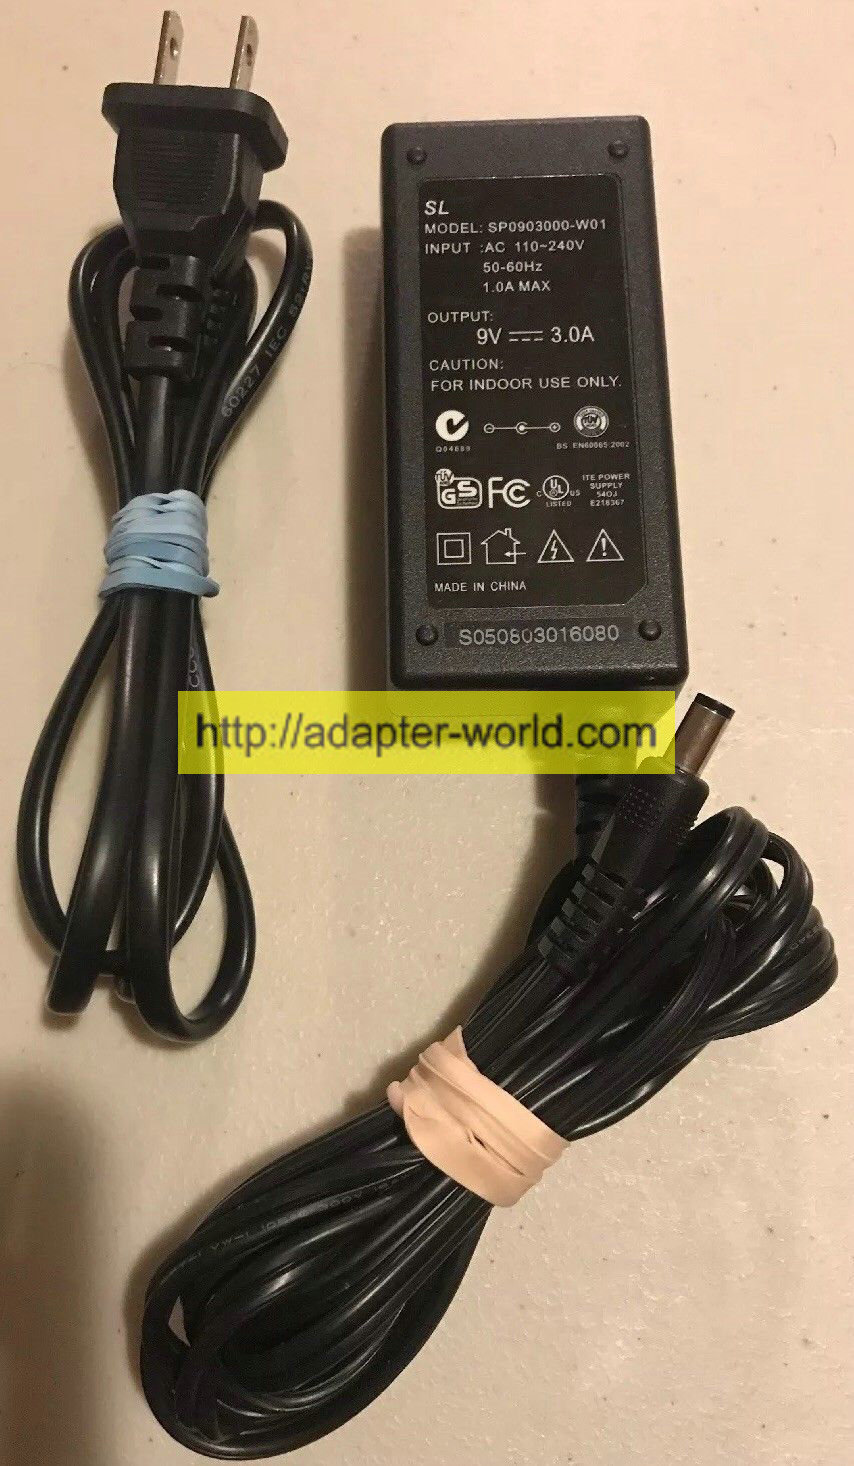 *100% Brand NEW* SL 9V 3.0A FOR SP0903000-W01 AC/DC adapter Power Supply Free shipping!